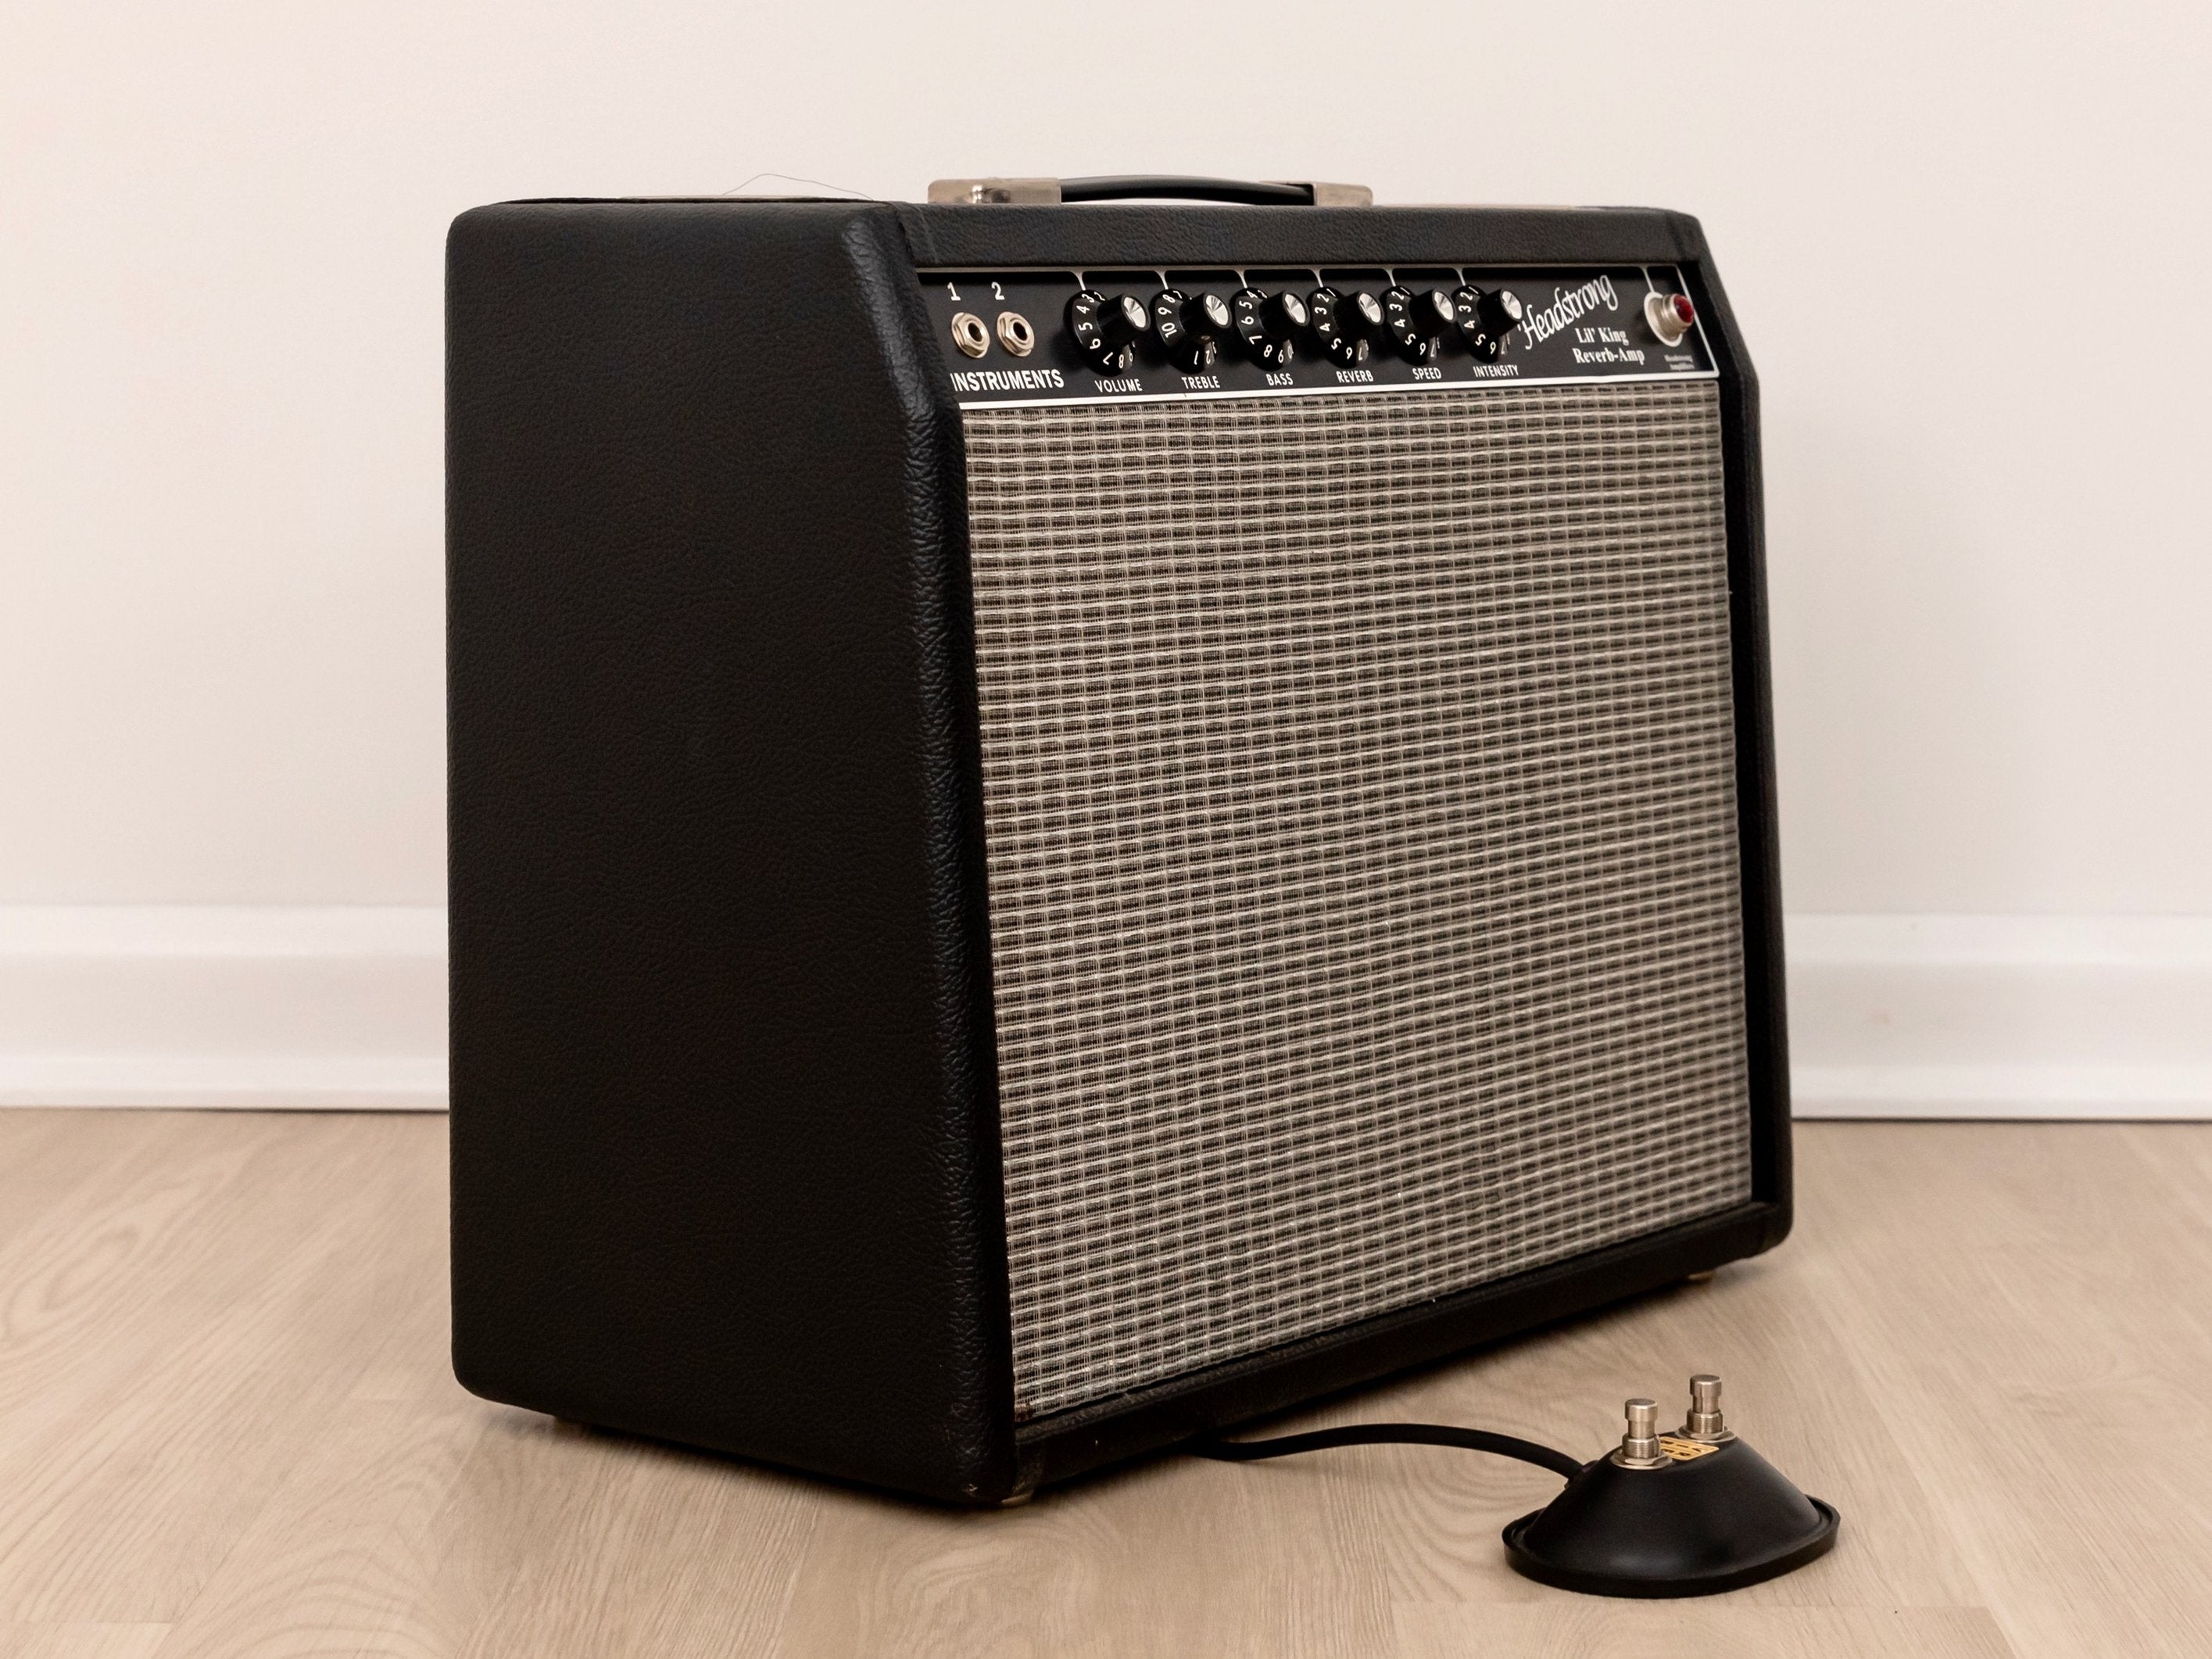 2009 Headstrong Lil' King Reverb Boutique Hand-Wired 1x12 Black Panel Princeton-Style Tube Amp w/ Cover, Ftsw